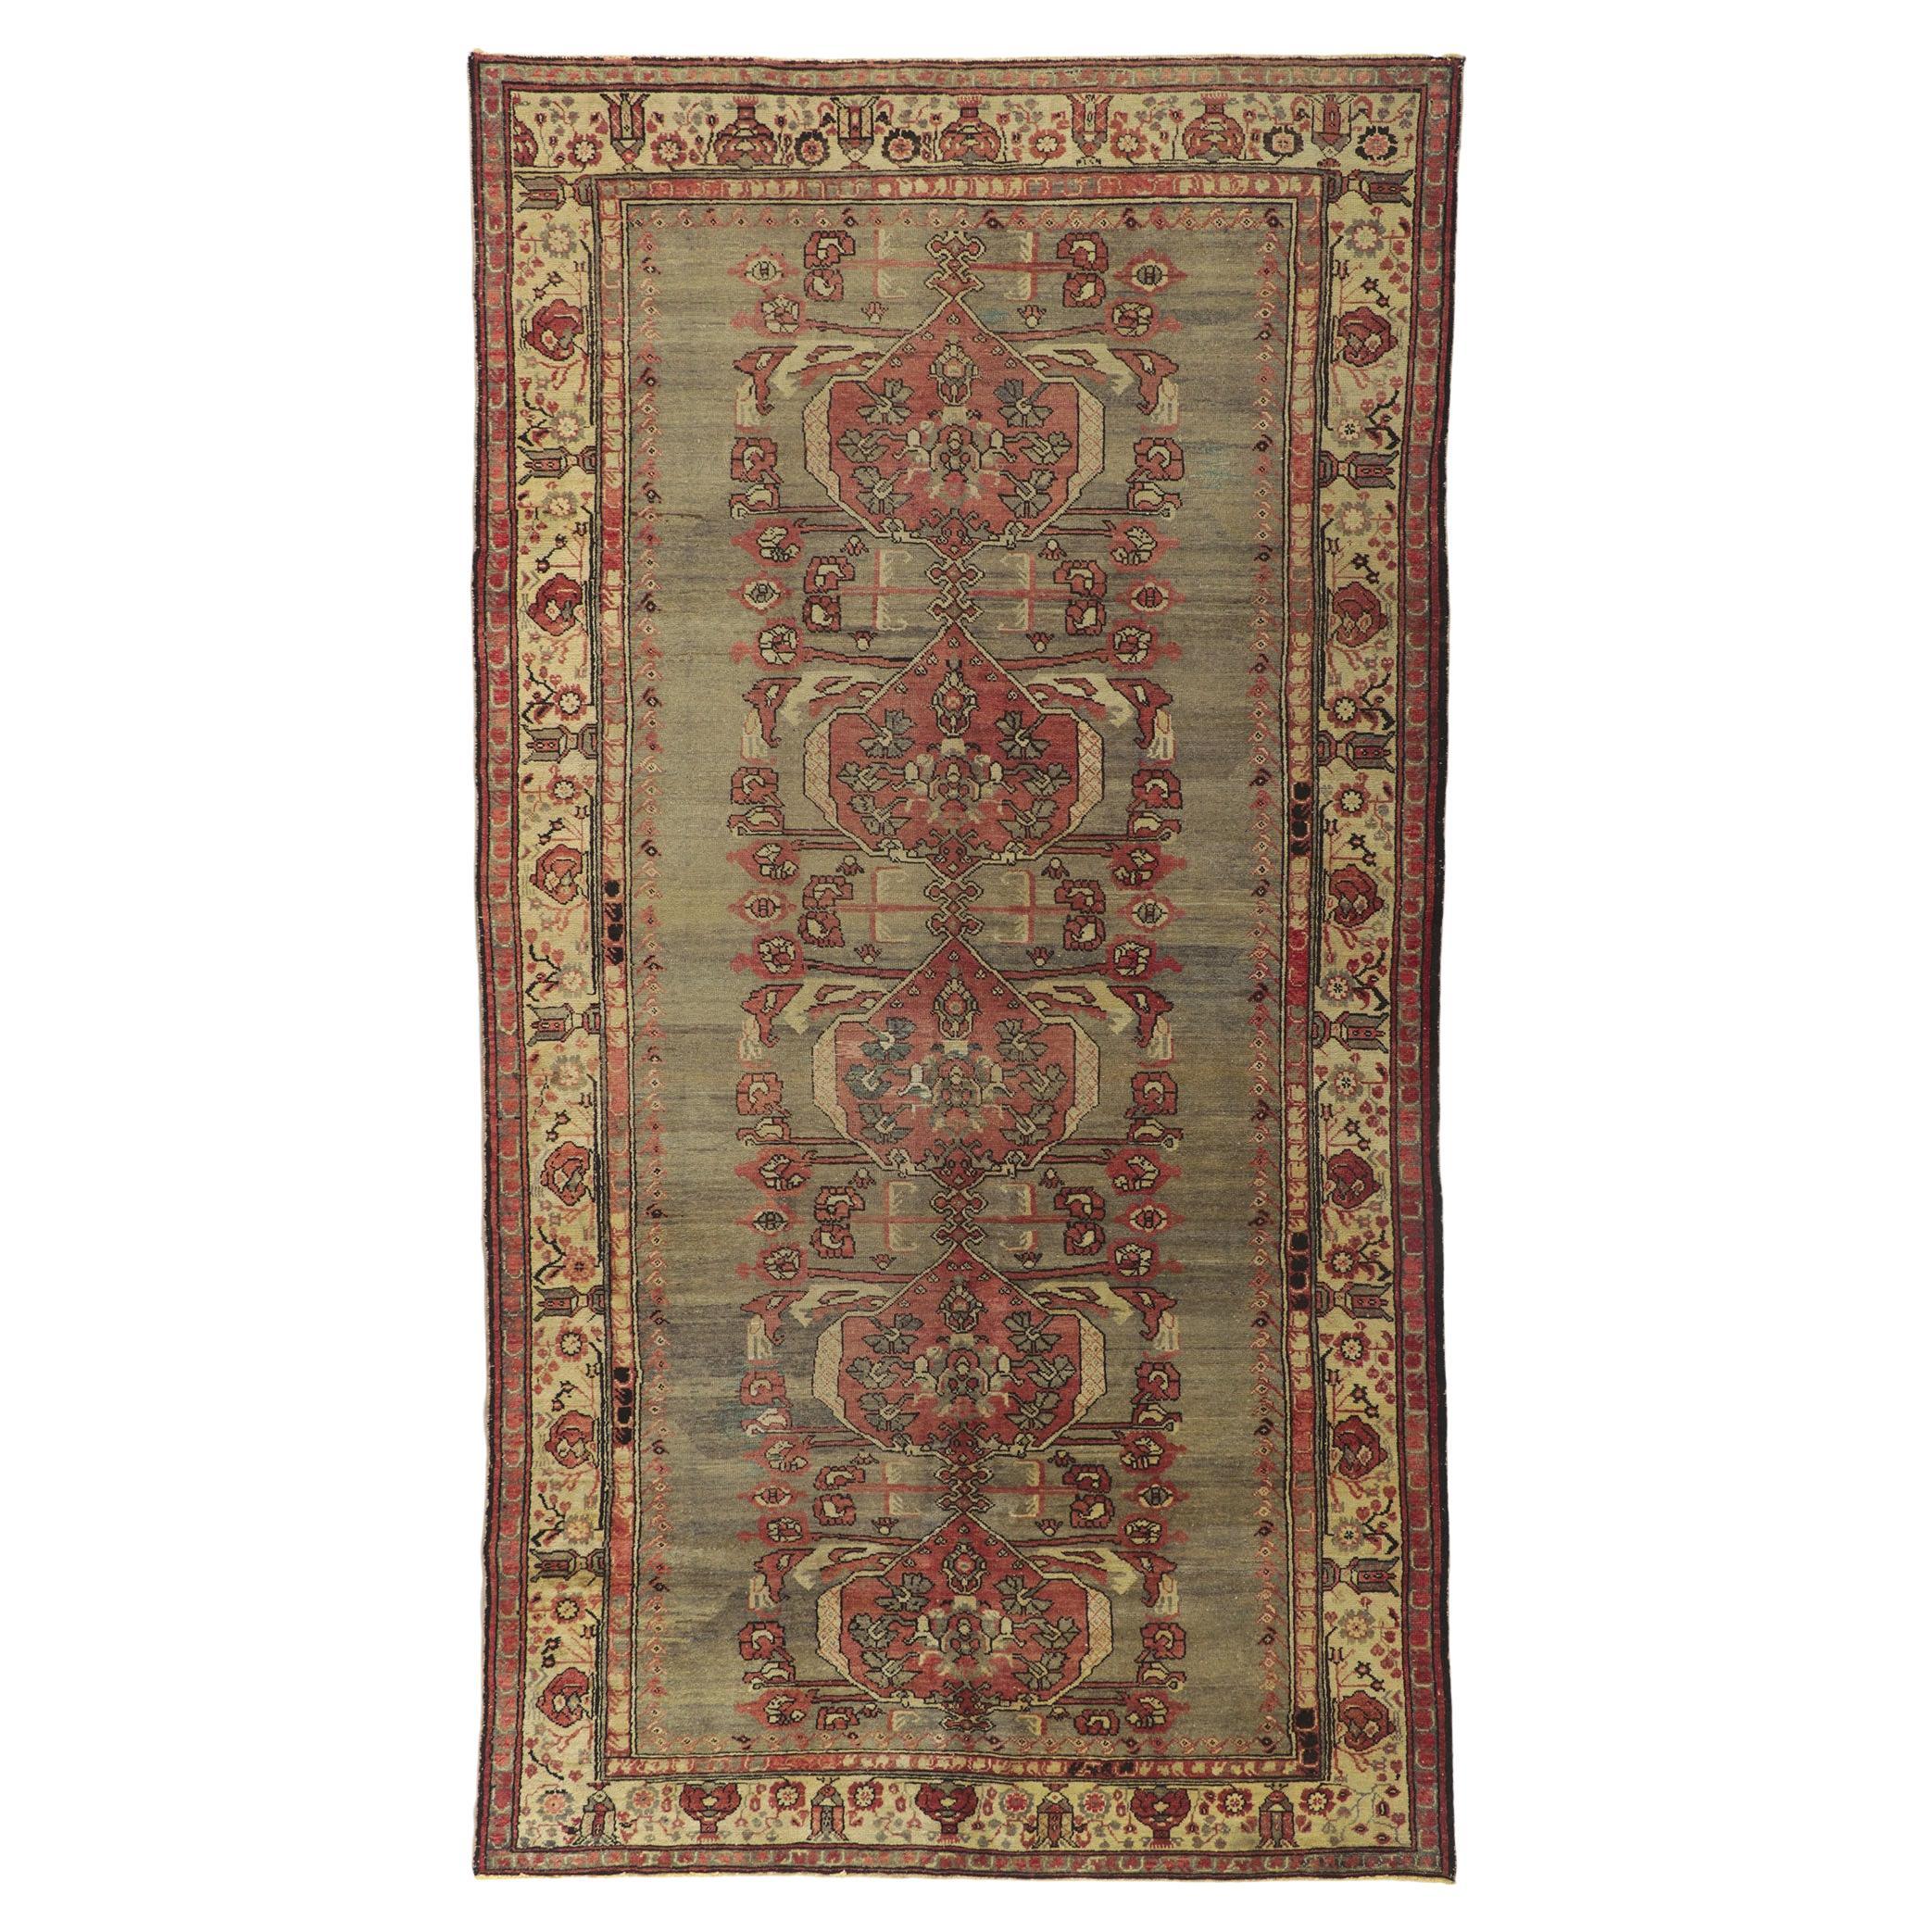 Distressed Vintage Turkish Oushak Rug with Rustic Modern Industrial Style